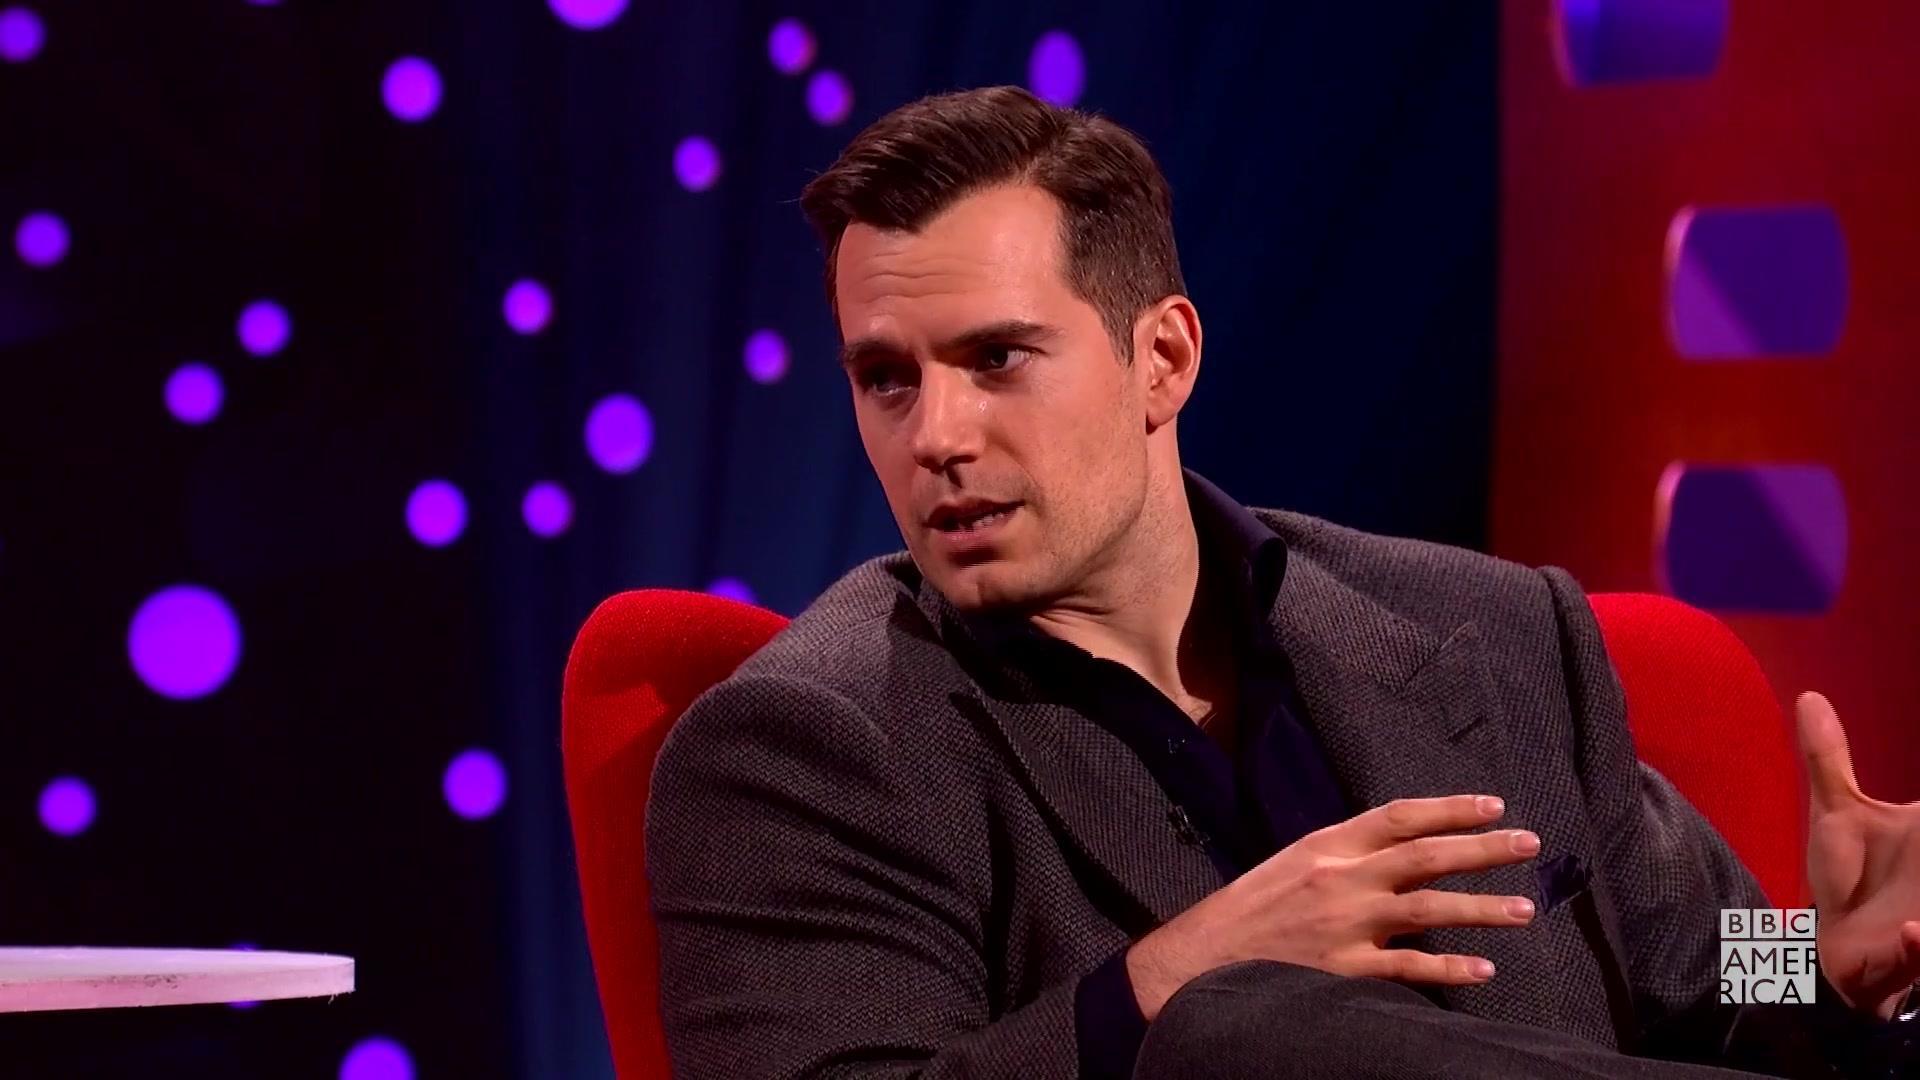 Watch Henry Cavill’s Adorably Nerdy Hobby | The Graham Norton Show Video Extras